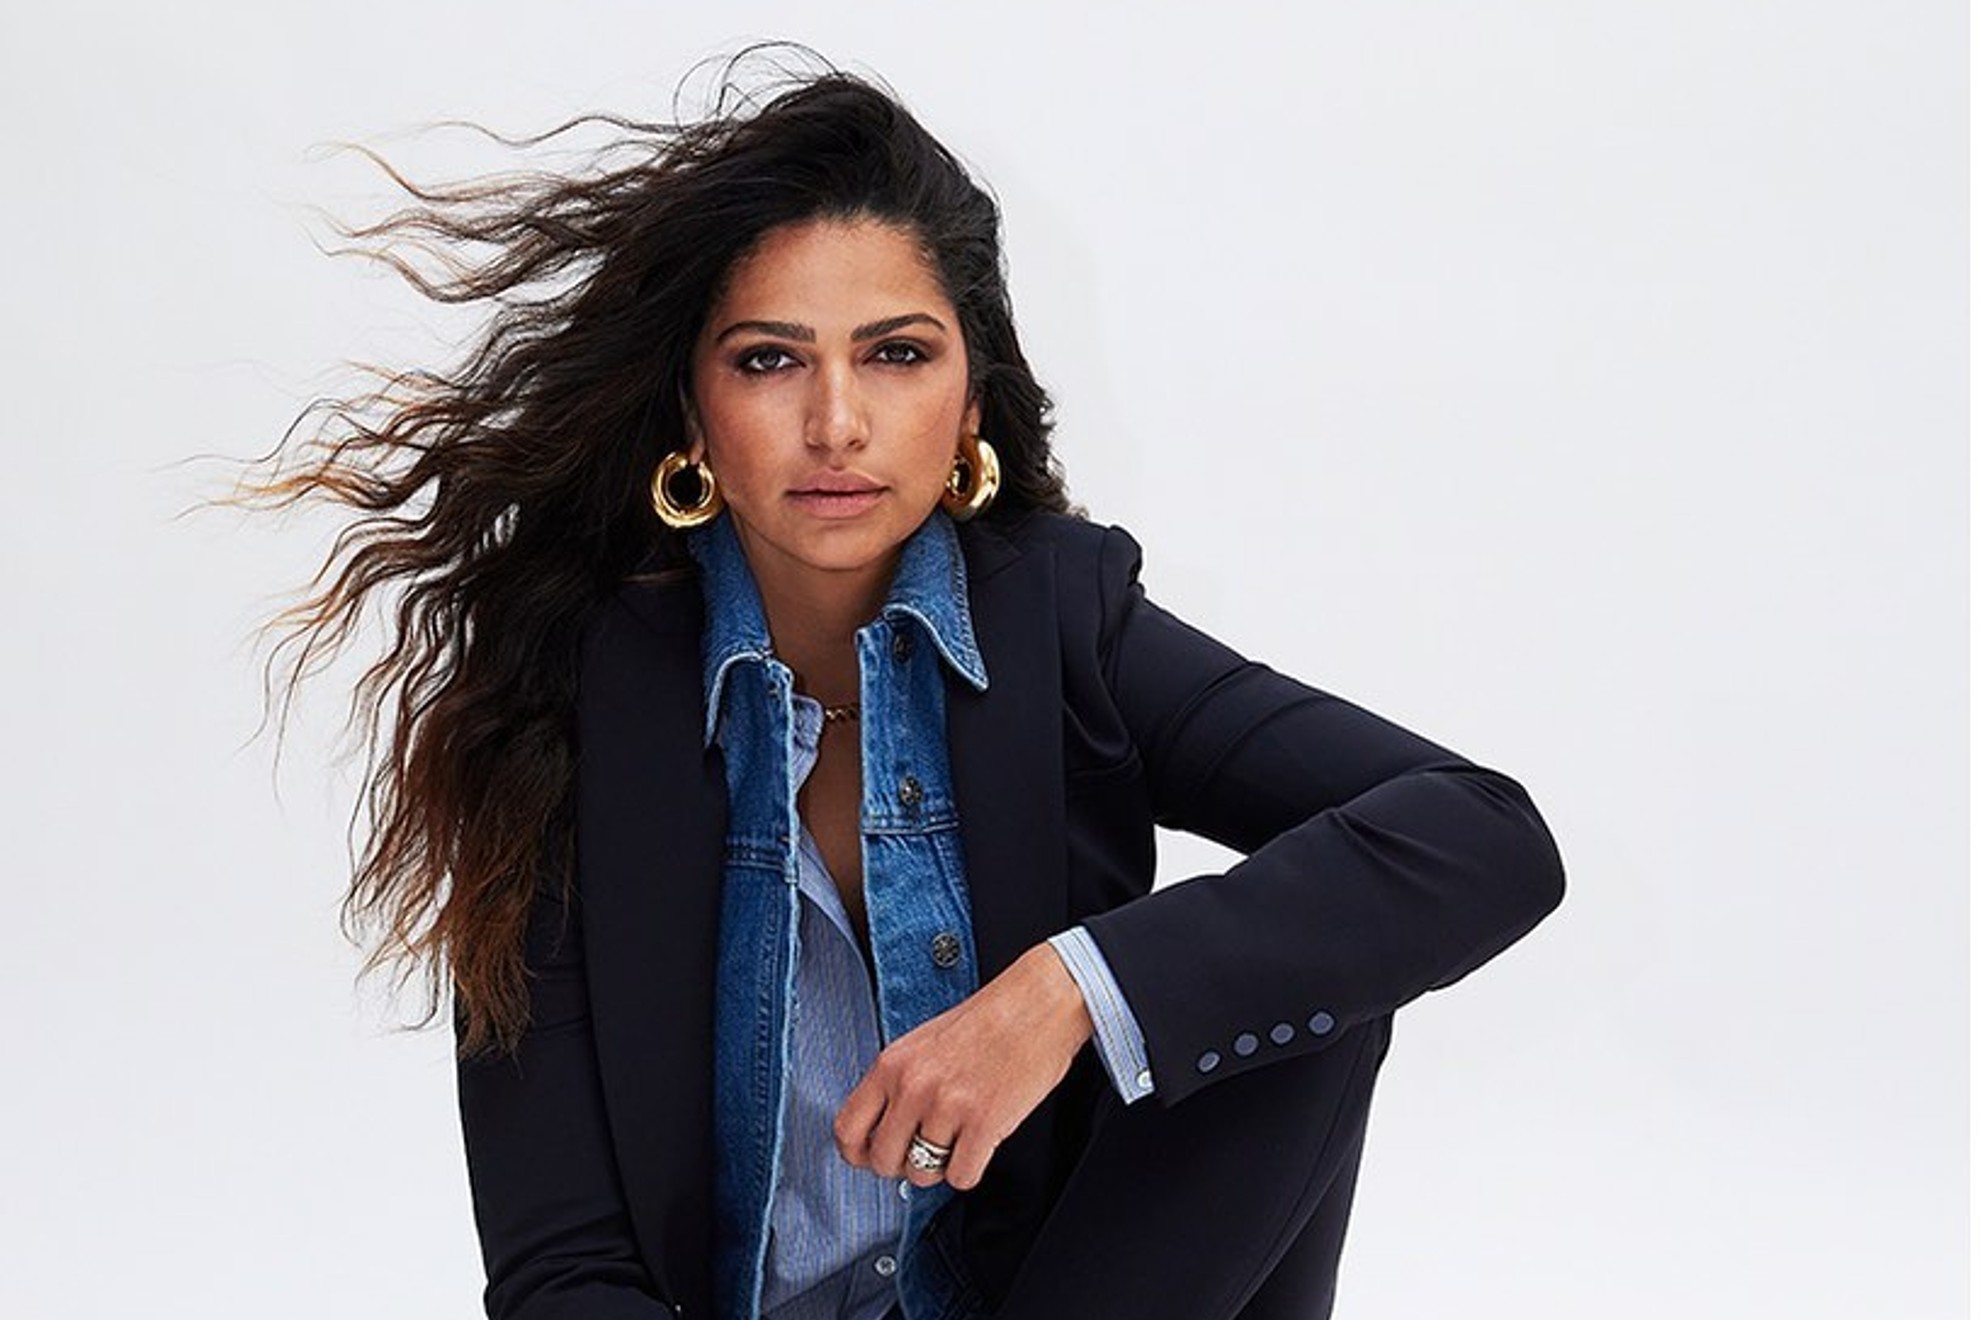 Matthew McConaughey's wife, Camila Alves, says she's fine after falling and  injuring her neck